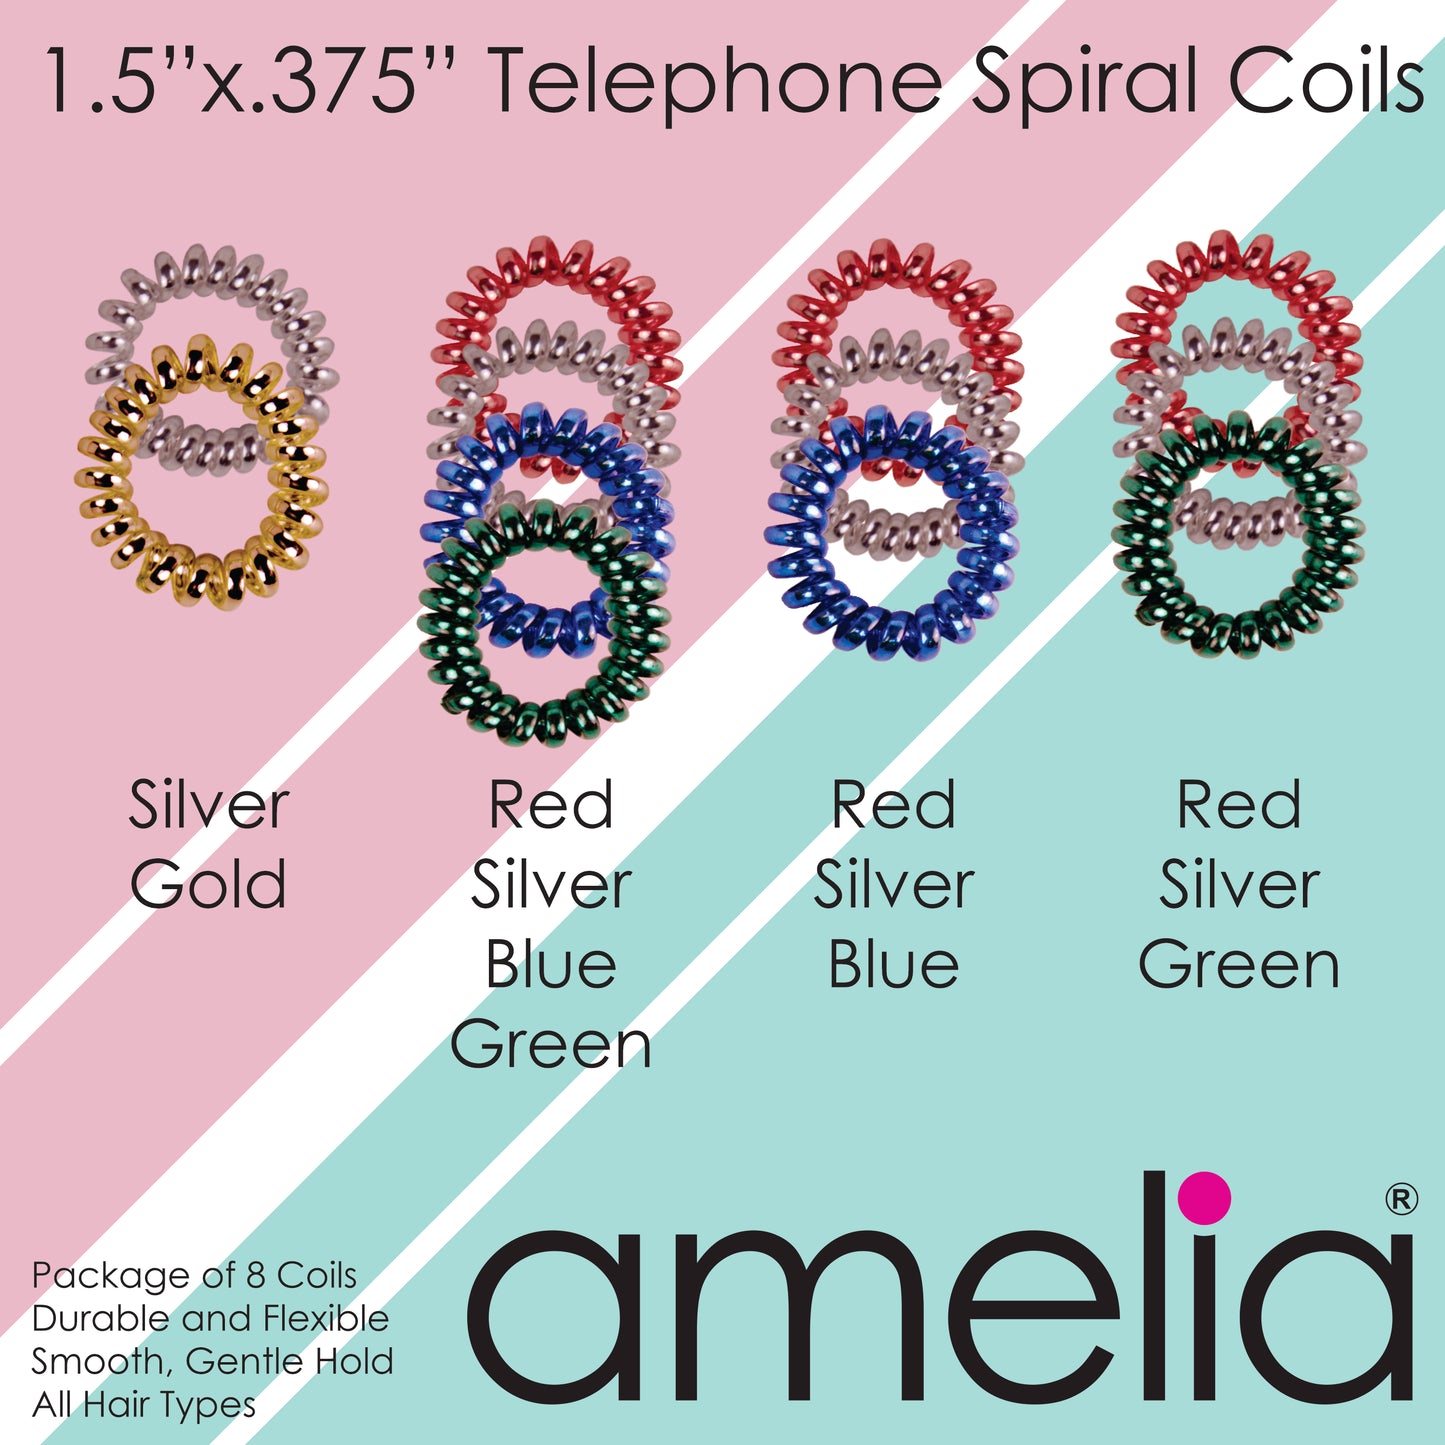 Amelia Beauty, 8 Small Shinny Elastic Hair Telephone Cord Coils, 1.5in Diameter Spiral Hair Ties, Strong Hold, Gentle on Hair, Red